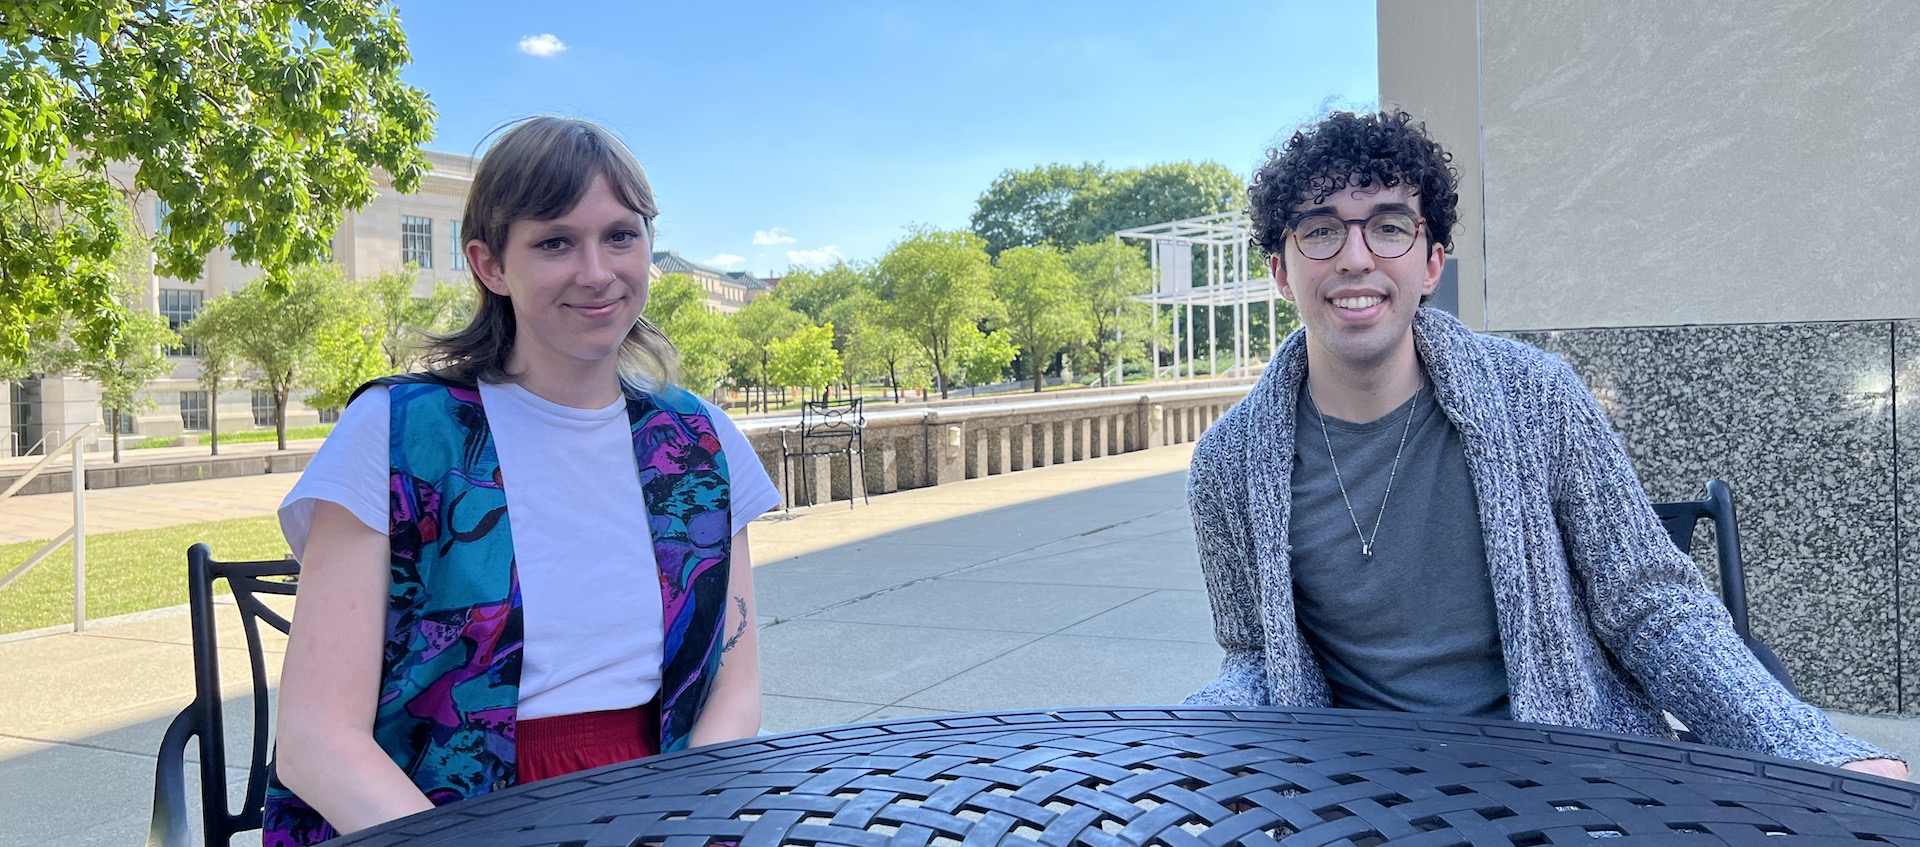 Laurel Hilliard and Austin Dunn sit at a table outside Mershon Auditorium with the Wexner Center in the background. Laurel has shoulder length light brown hair and is wearing a white top with a dark vest. Austin has curly dark hair and glasses. They are wearing a collared shirt and a cardigan sweater.